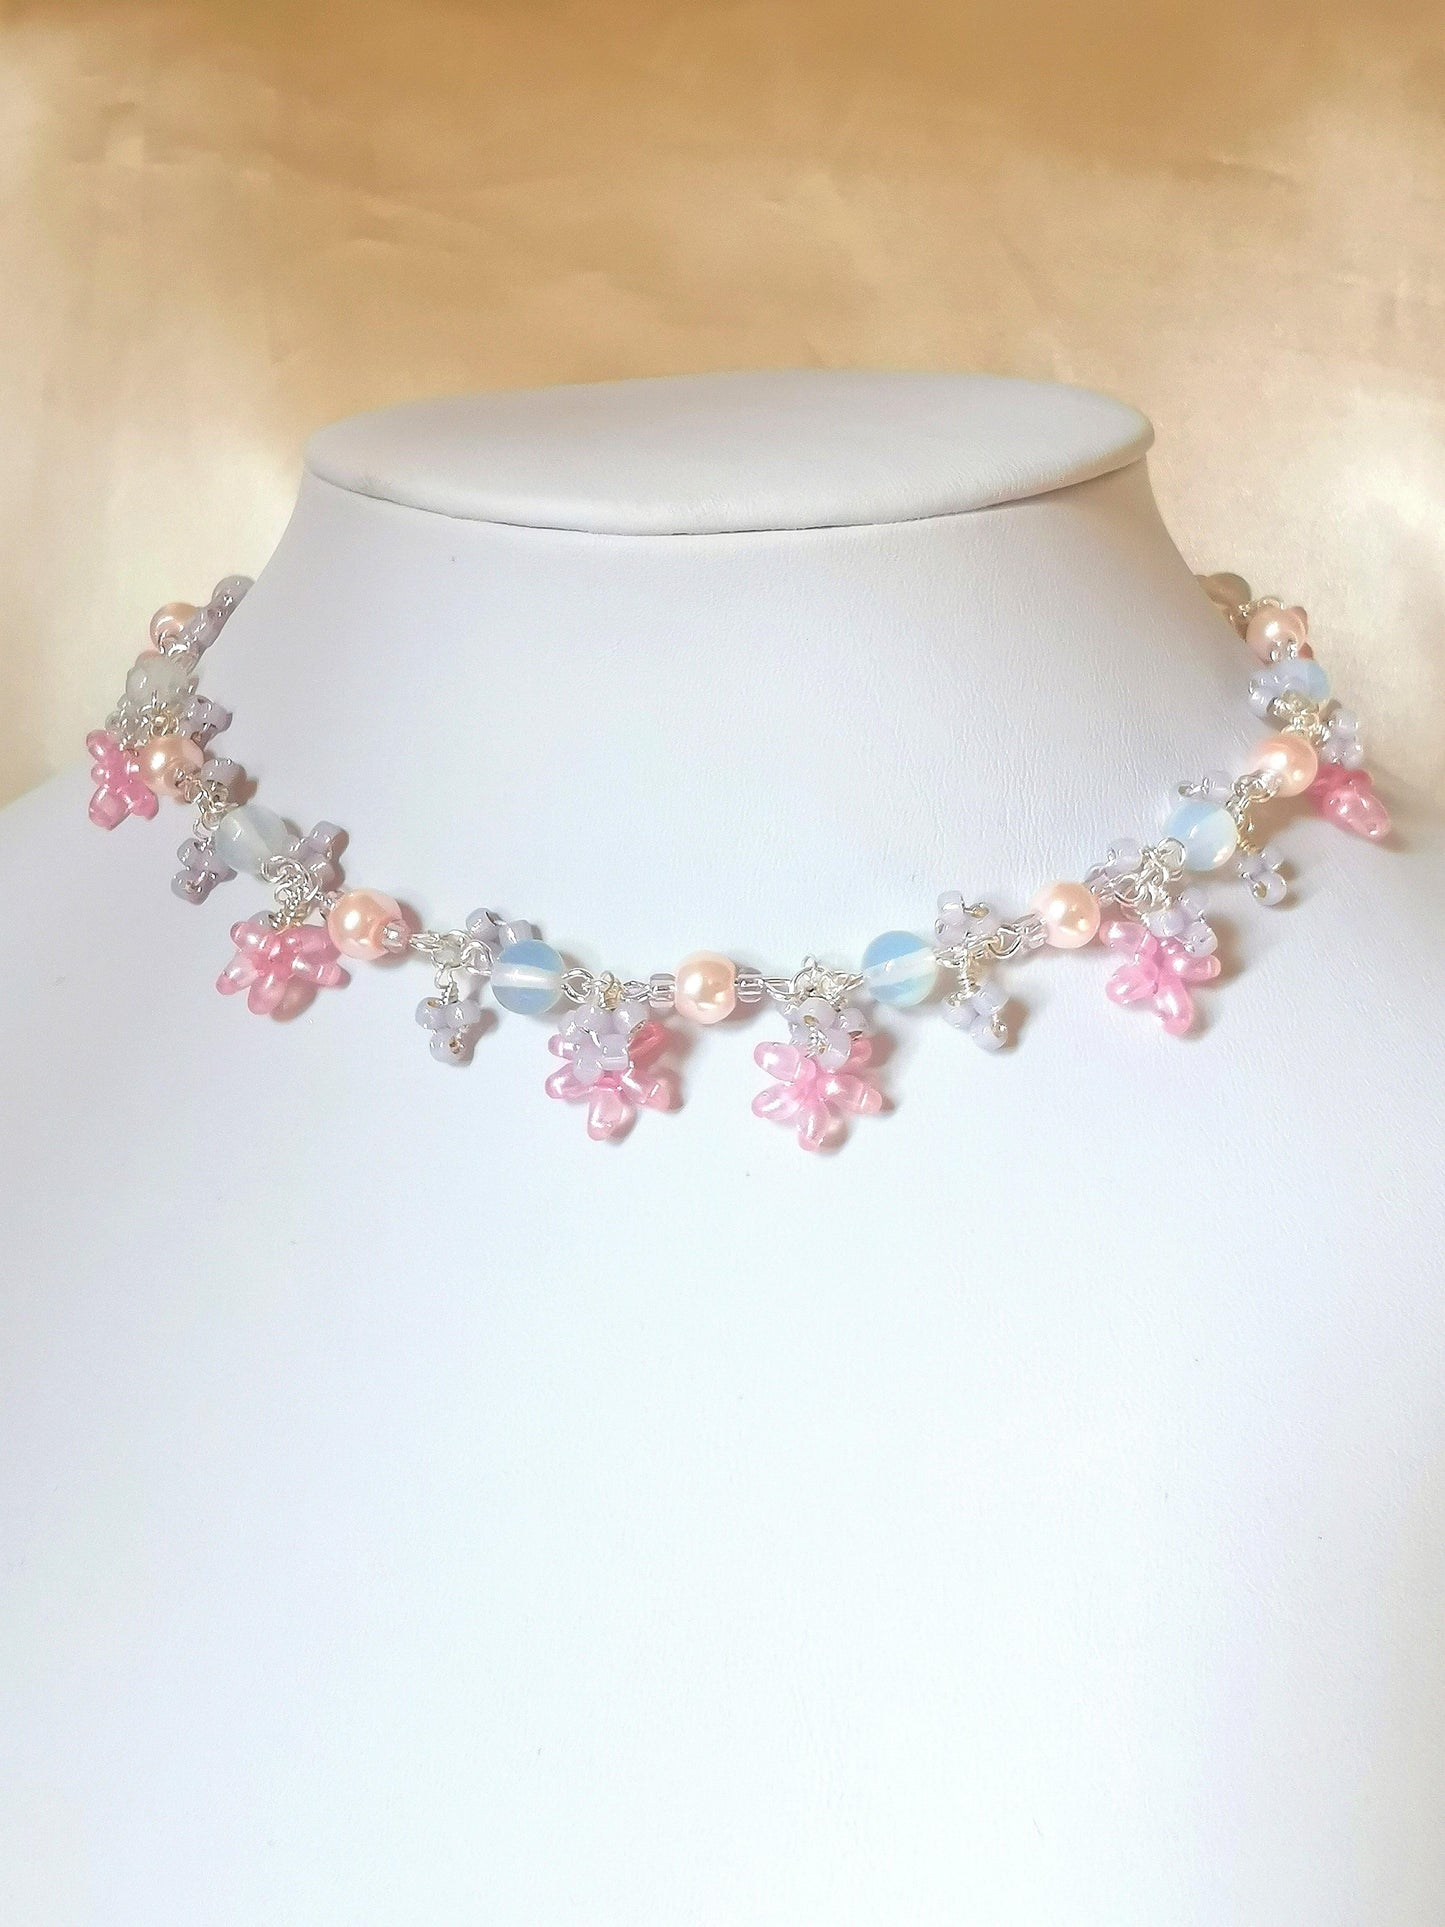 This is a sweet handmade silver choker with beautiful opalescence from the opalite beads and cute pastel flower-like details in pink and silvery purple.  This choker-necklace is handcrafted with glass pearls, opalite beads, silvery purple glass seed beads, glass twin beads, in silver-plated findings and tarnish resistant copper wire.